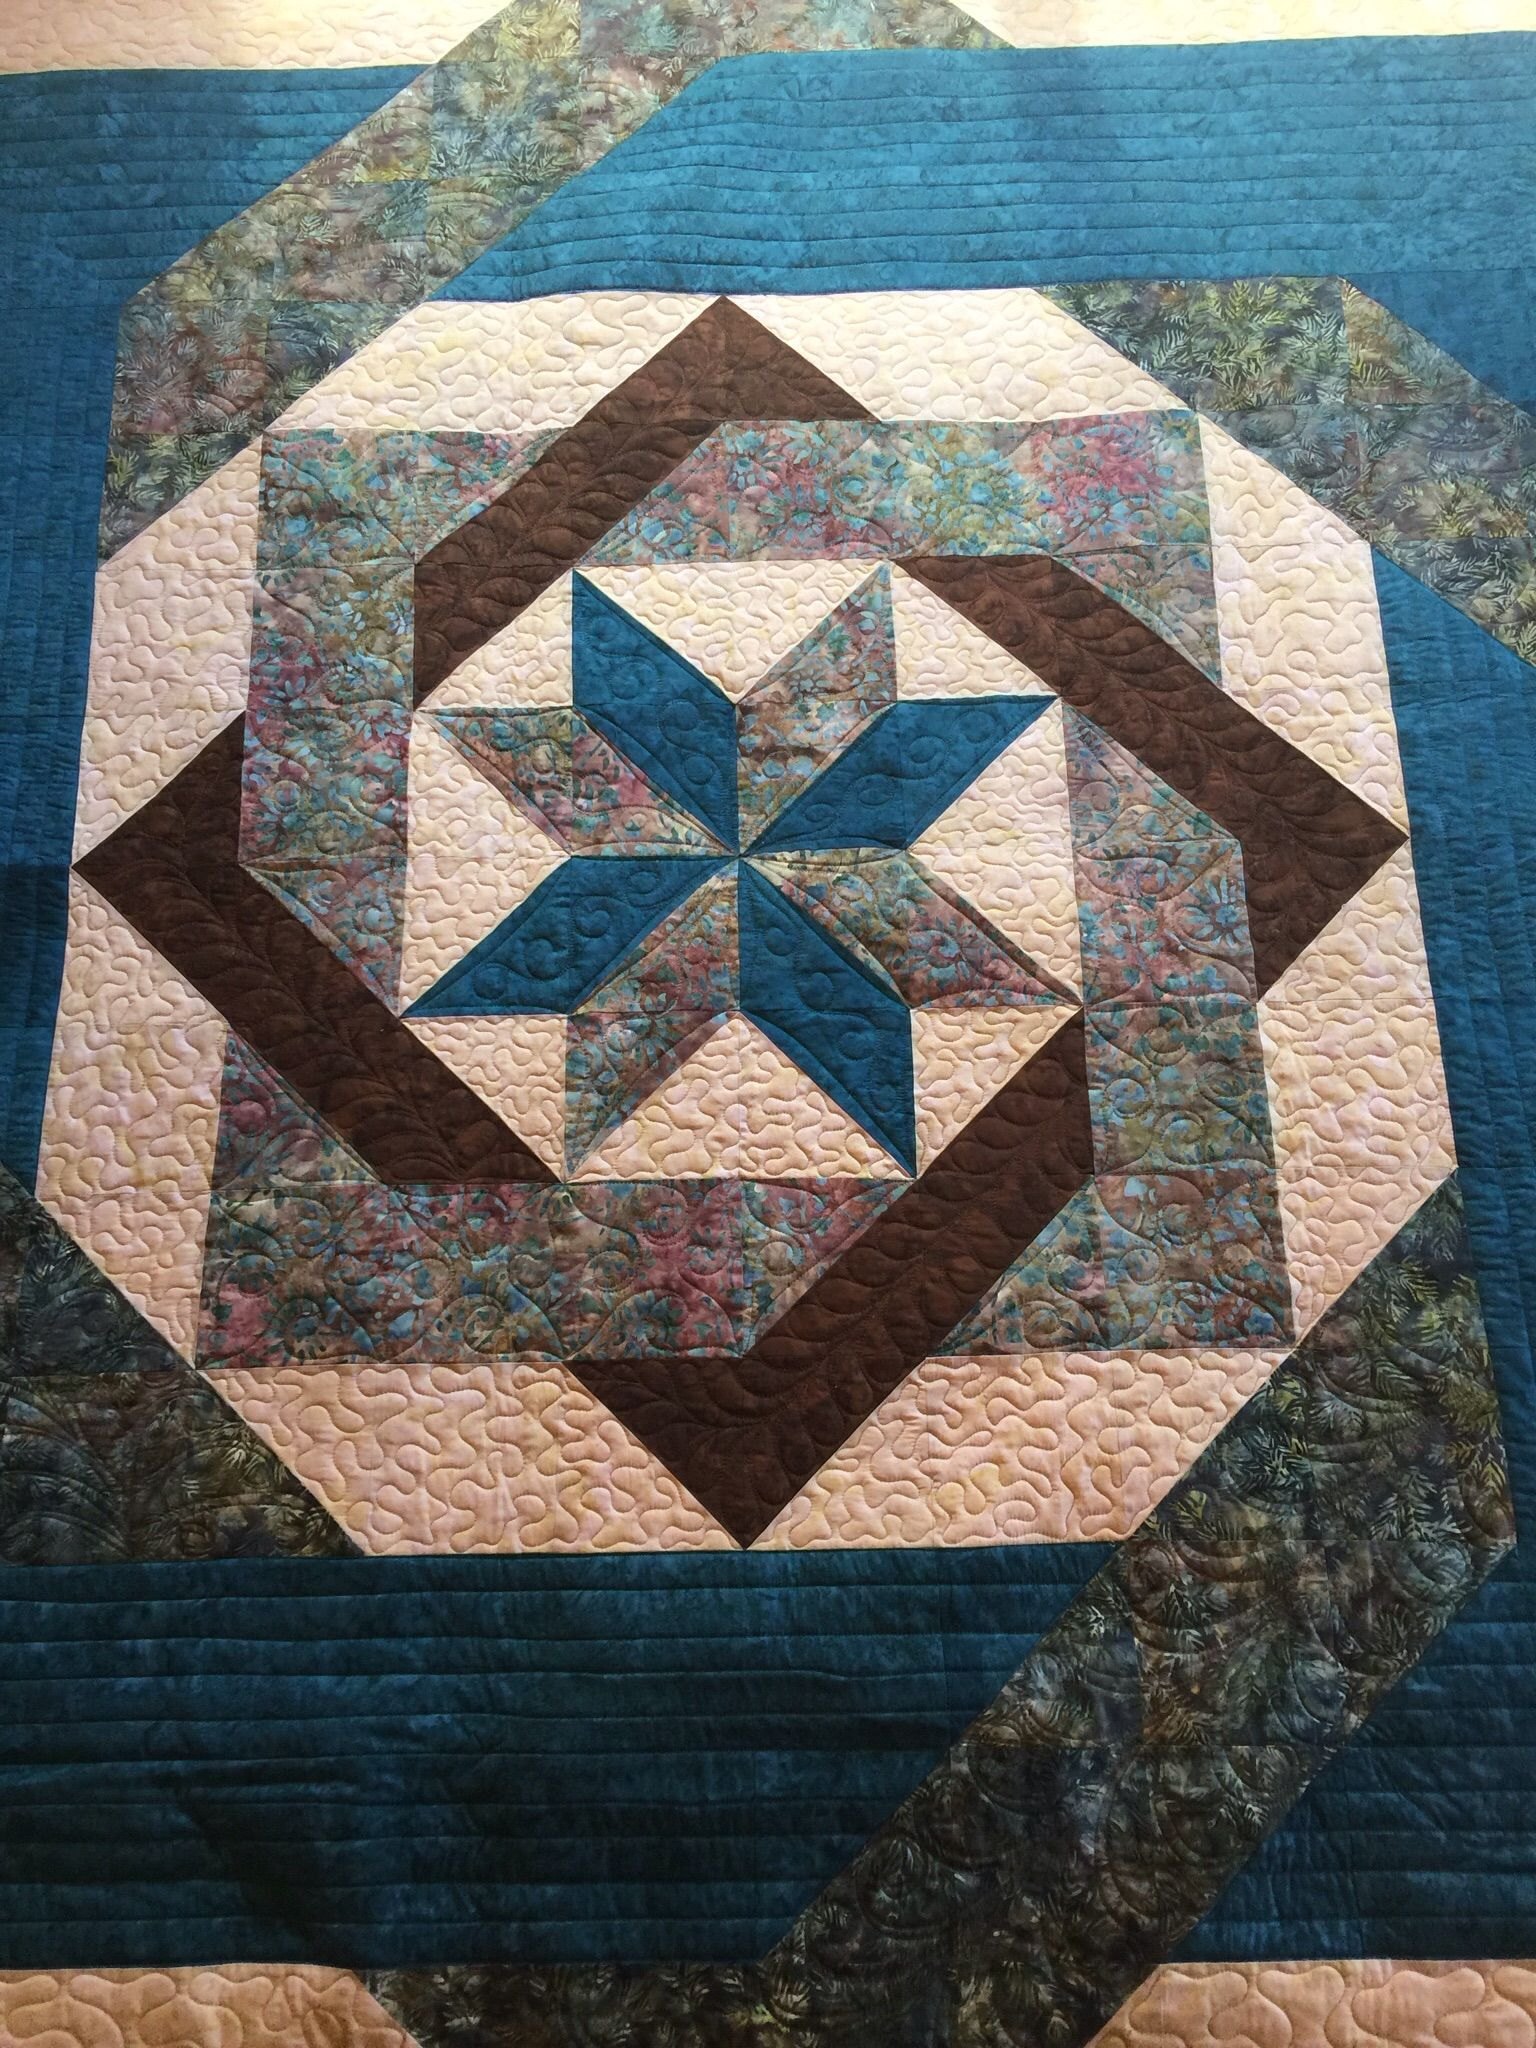 Labyrinth Star Quilt Star Quilt Patterns Star Quilts Labrynth Quilt